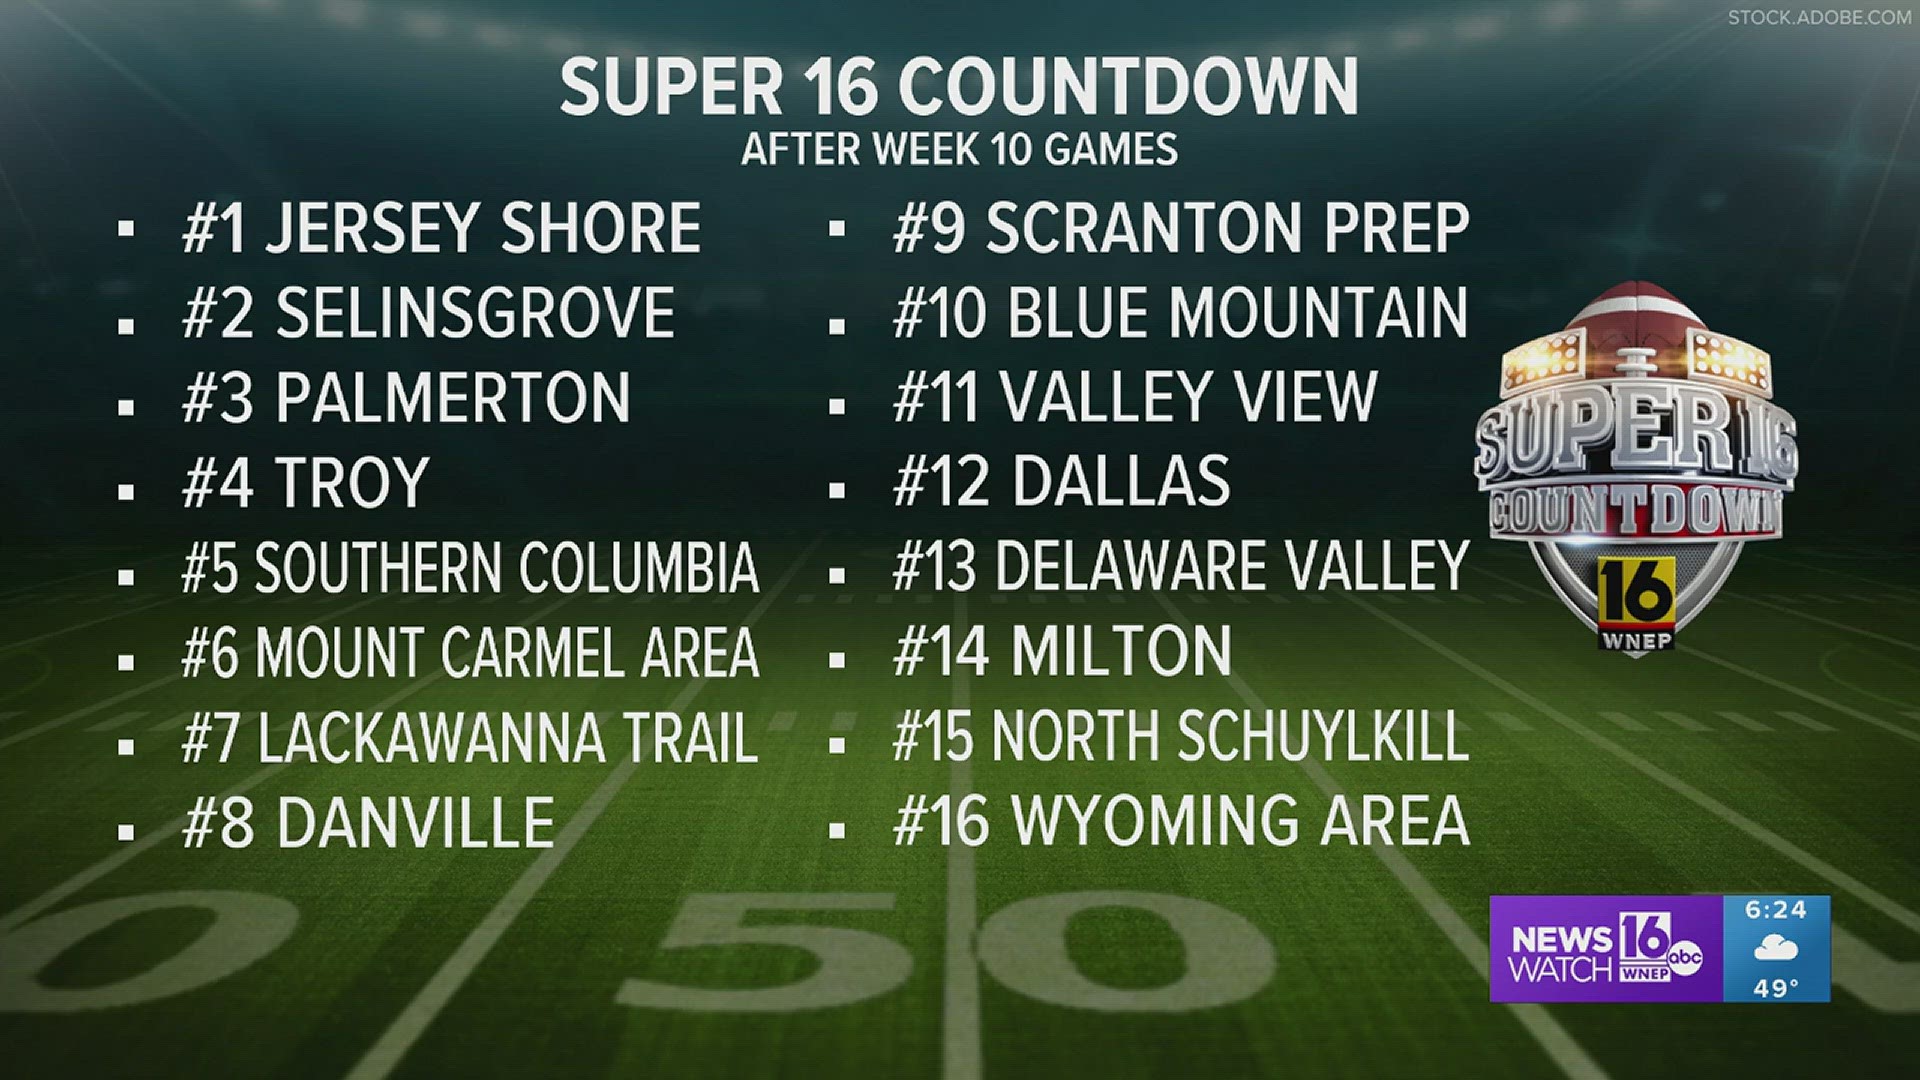 Wyoming Area and North Schuylkill enter the countdown